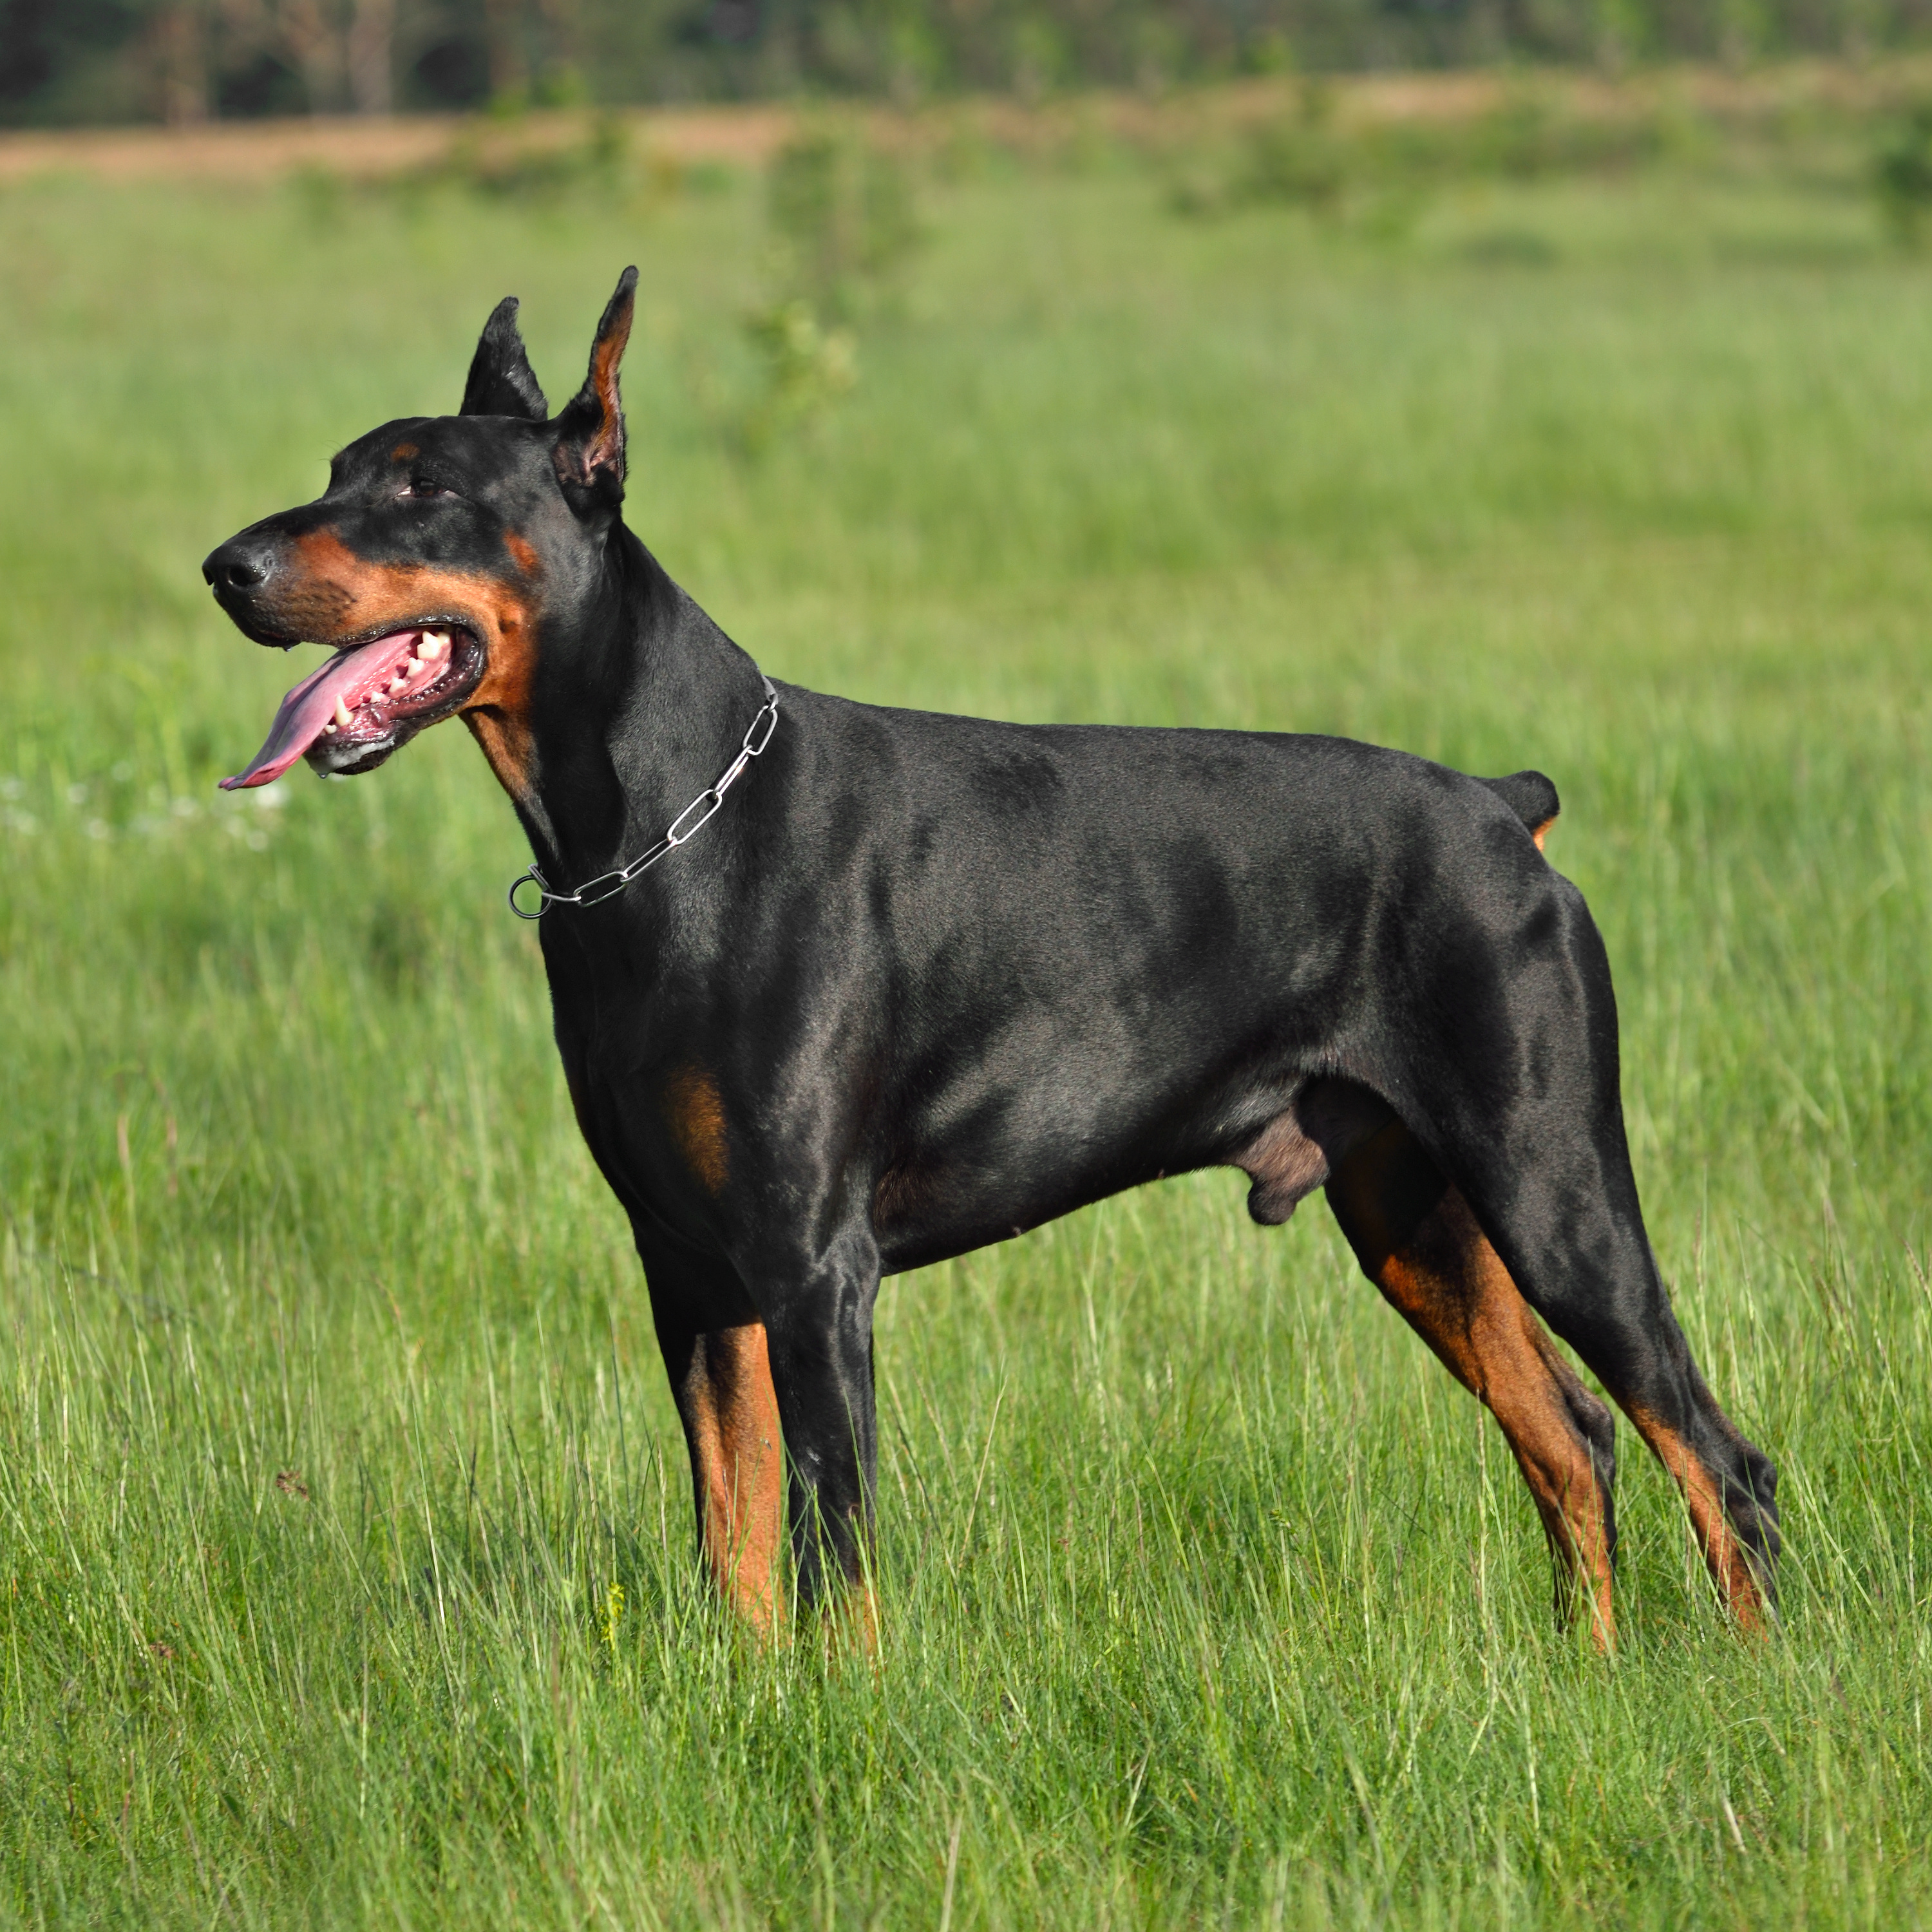 Dog Training Elite has expert Doberman training in Raleigh / Cary, NC
																															 that are experienced in a variety of positive training methods for Dobermans.